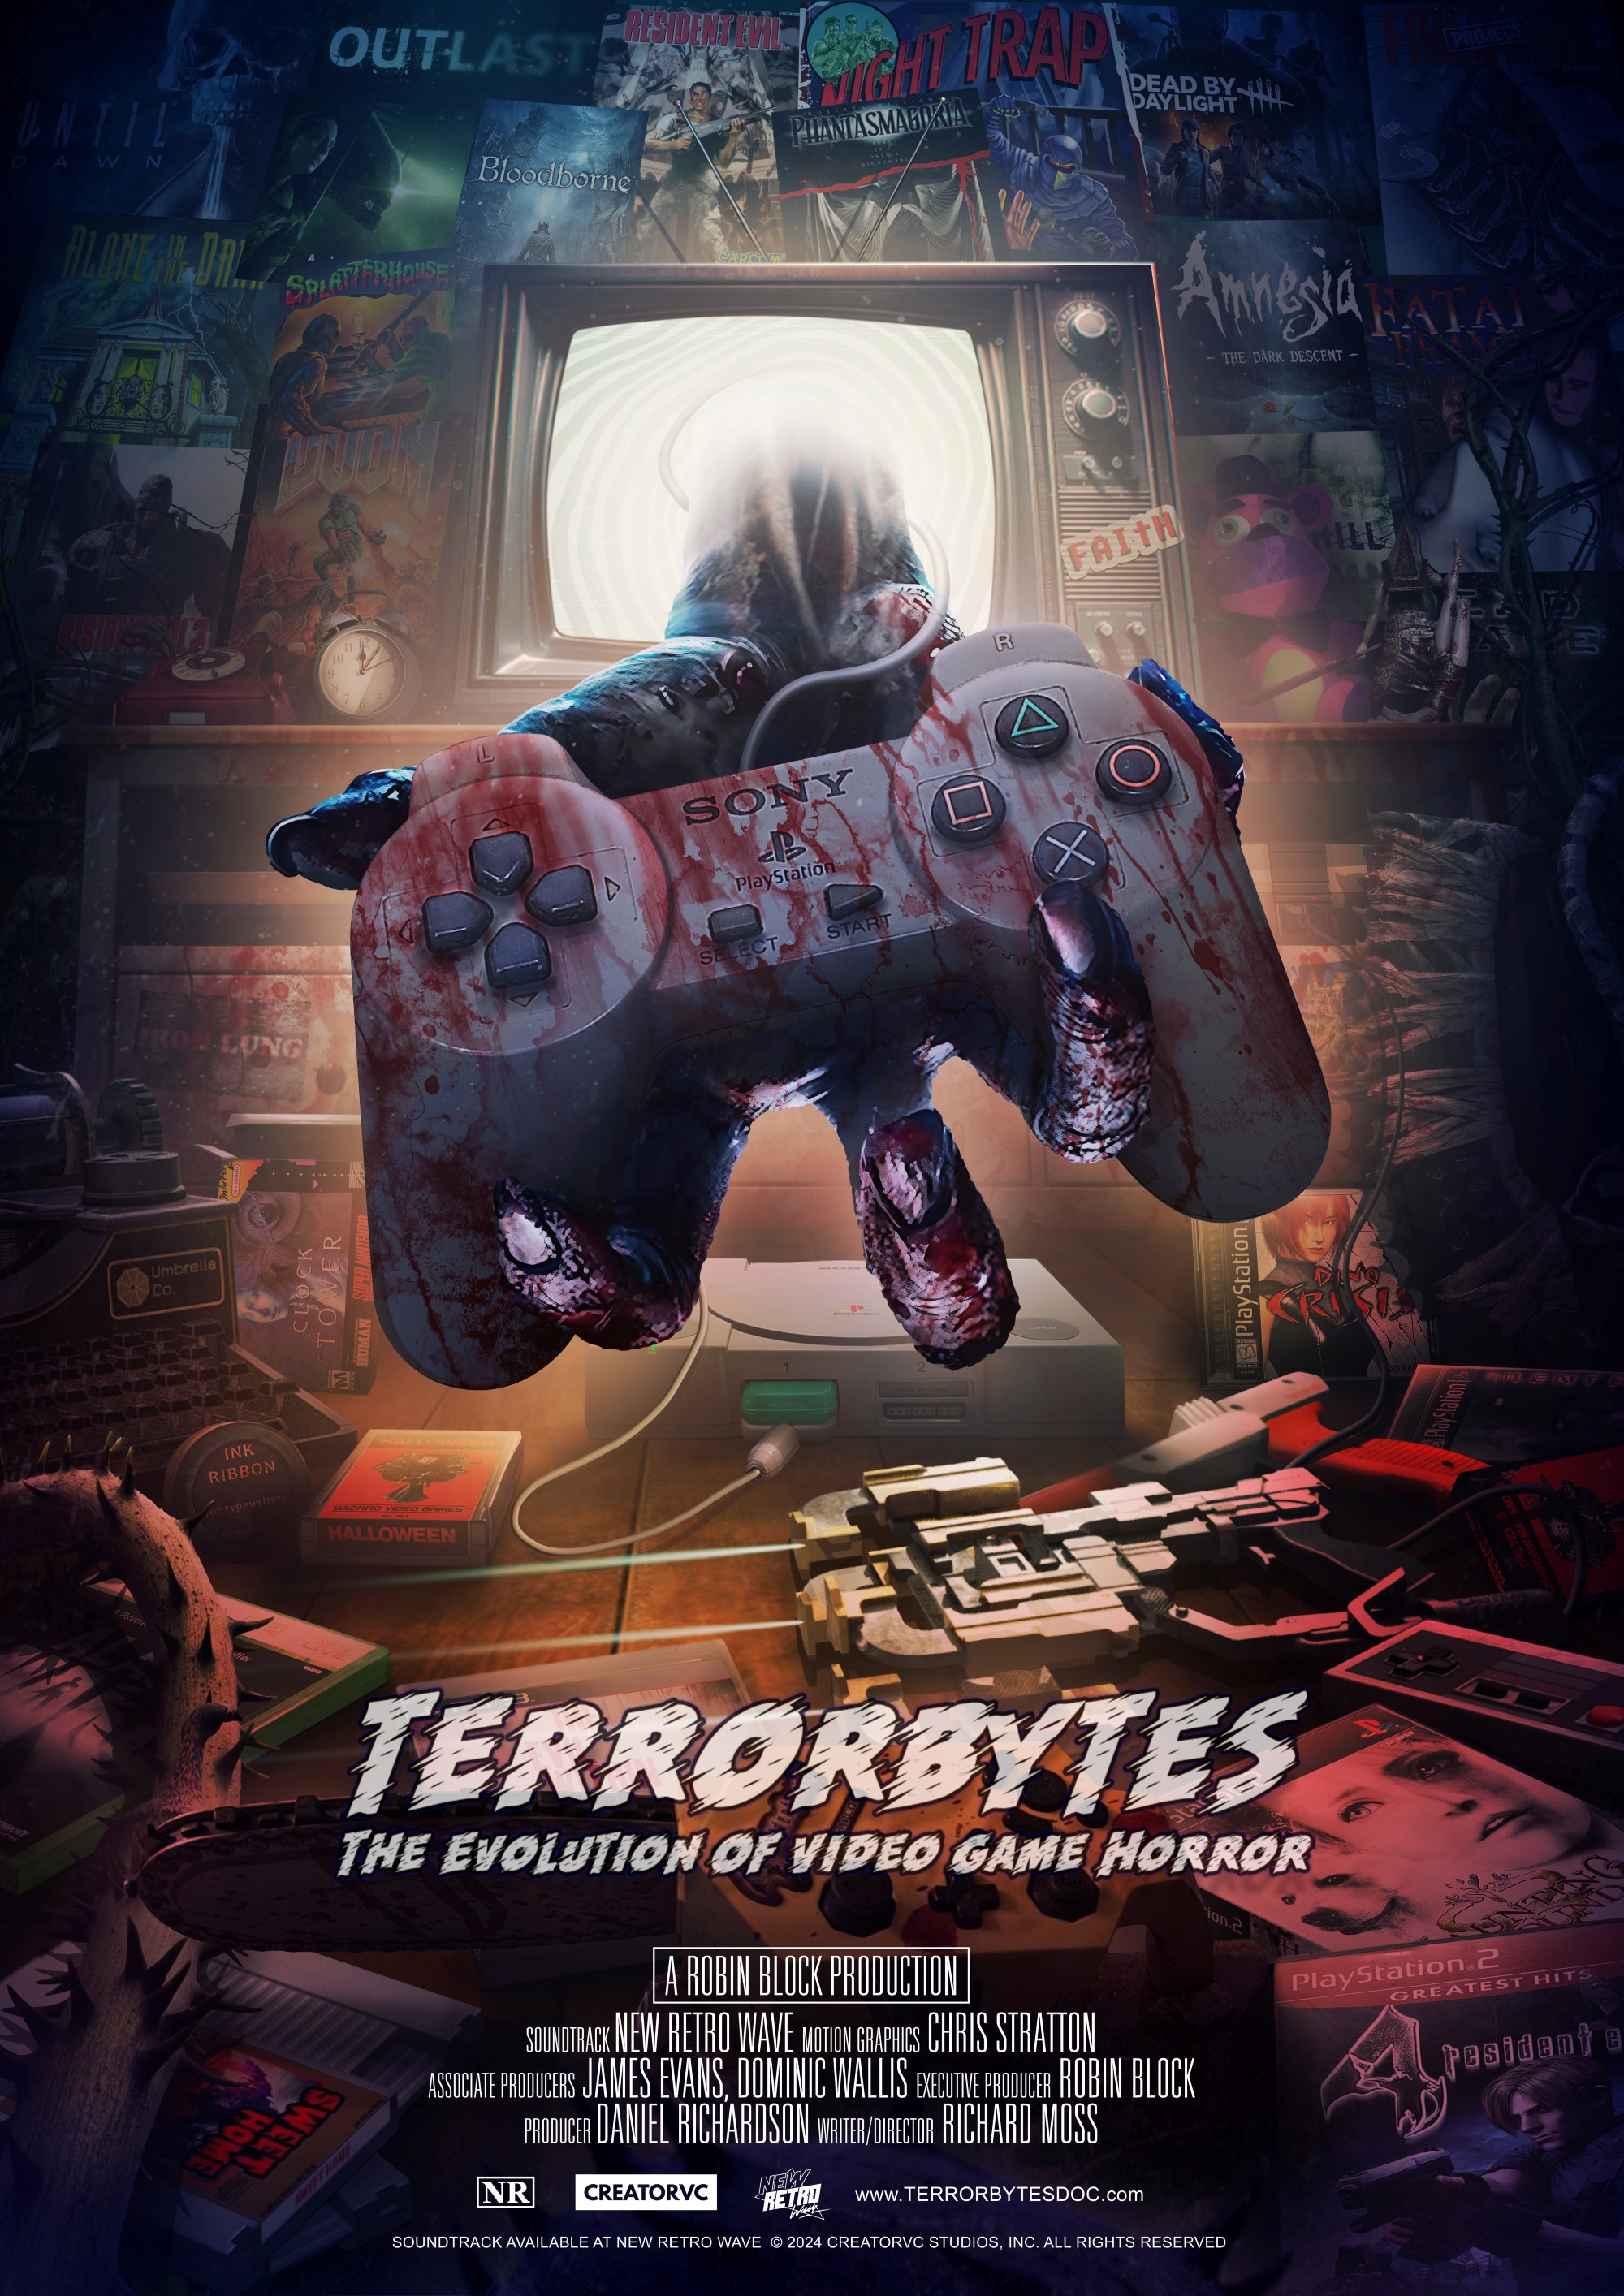 Poster for TerrorBytes: The Evolution of Video Game Horror, a Robin Block Production that's written/directed by Richard Moss and produced by Daniel Richardson